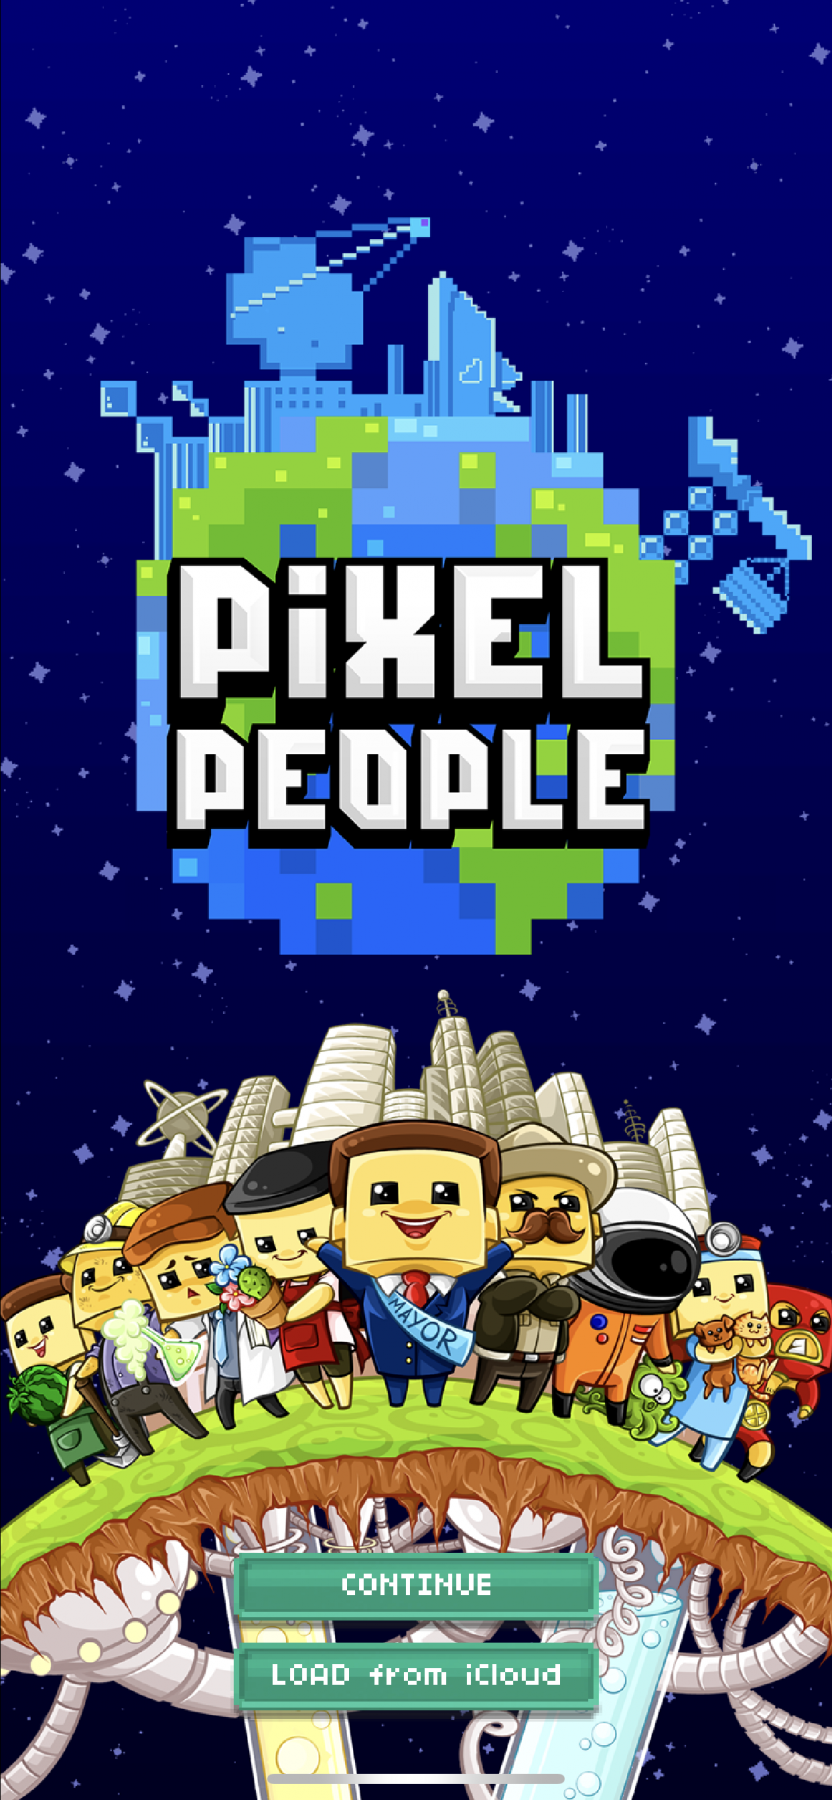 how to make a model in pixel people